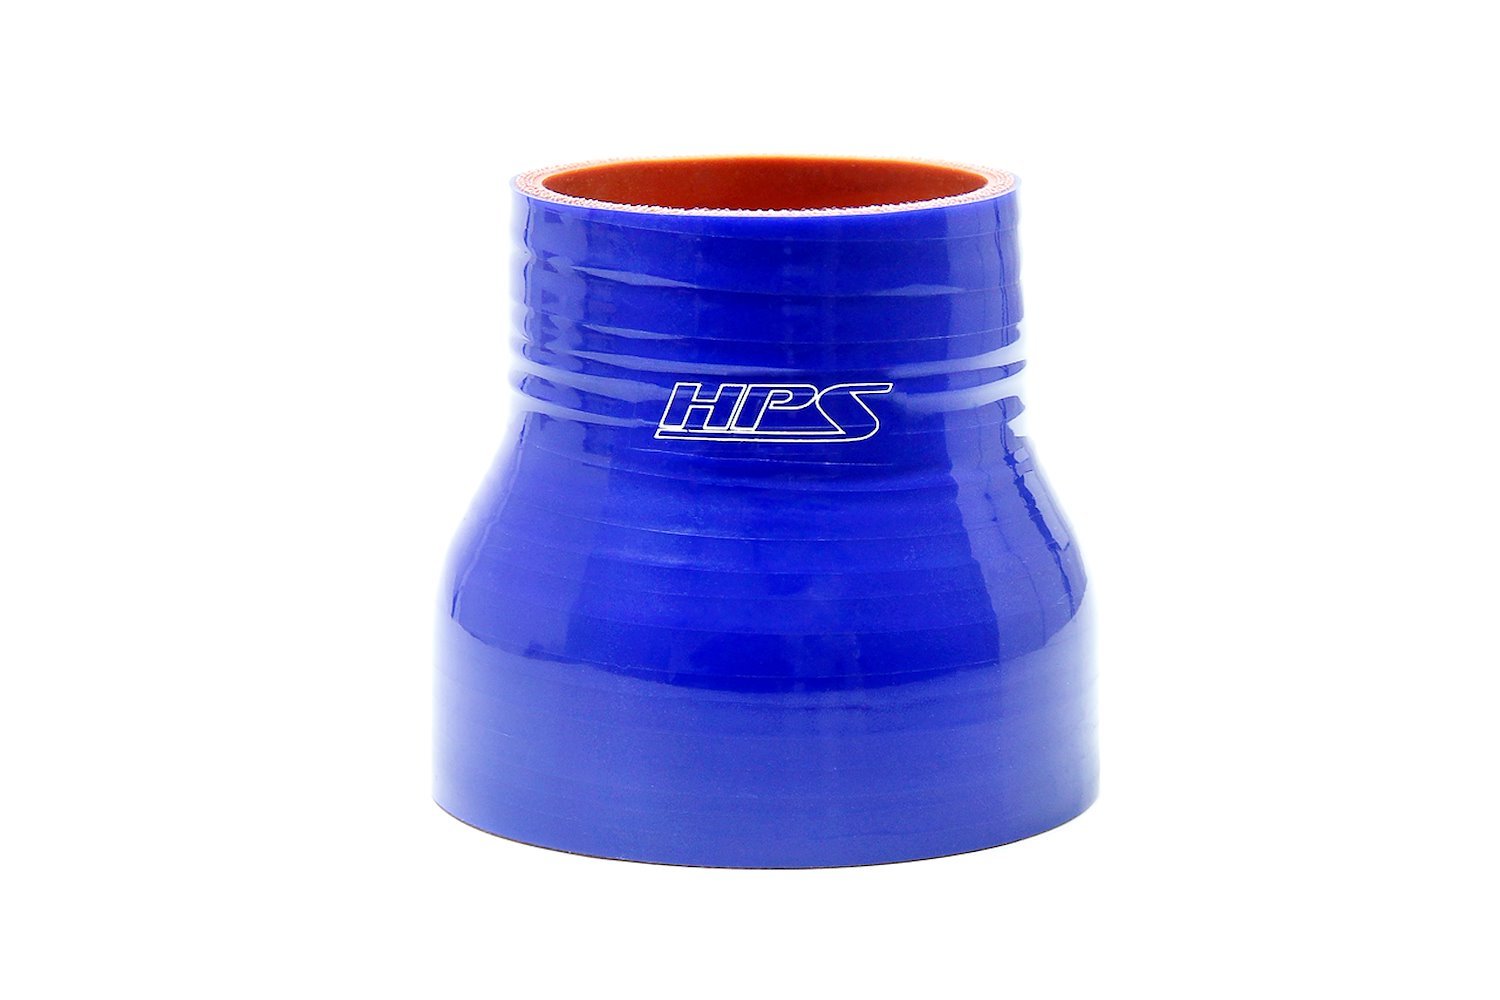 HTSR-250-300-L4-BLUE Silicone Reducer Hose, High-Temp 4-Ply Reinforced, 2-1/2 in. - 3 in. ID, 4 in. Long, Blue